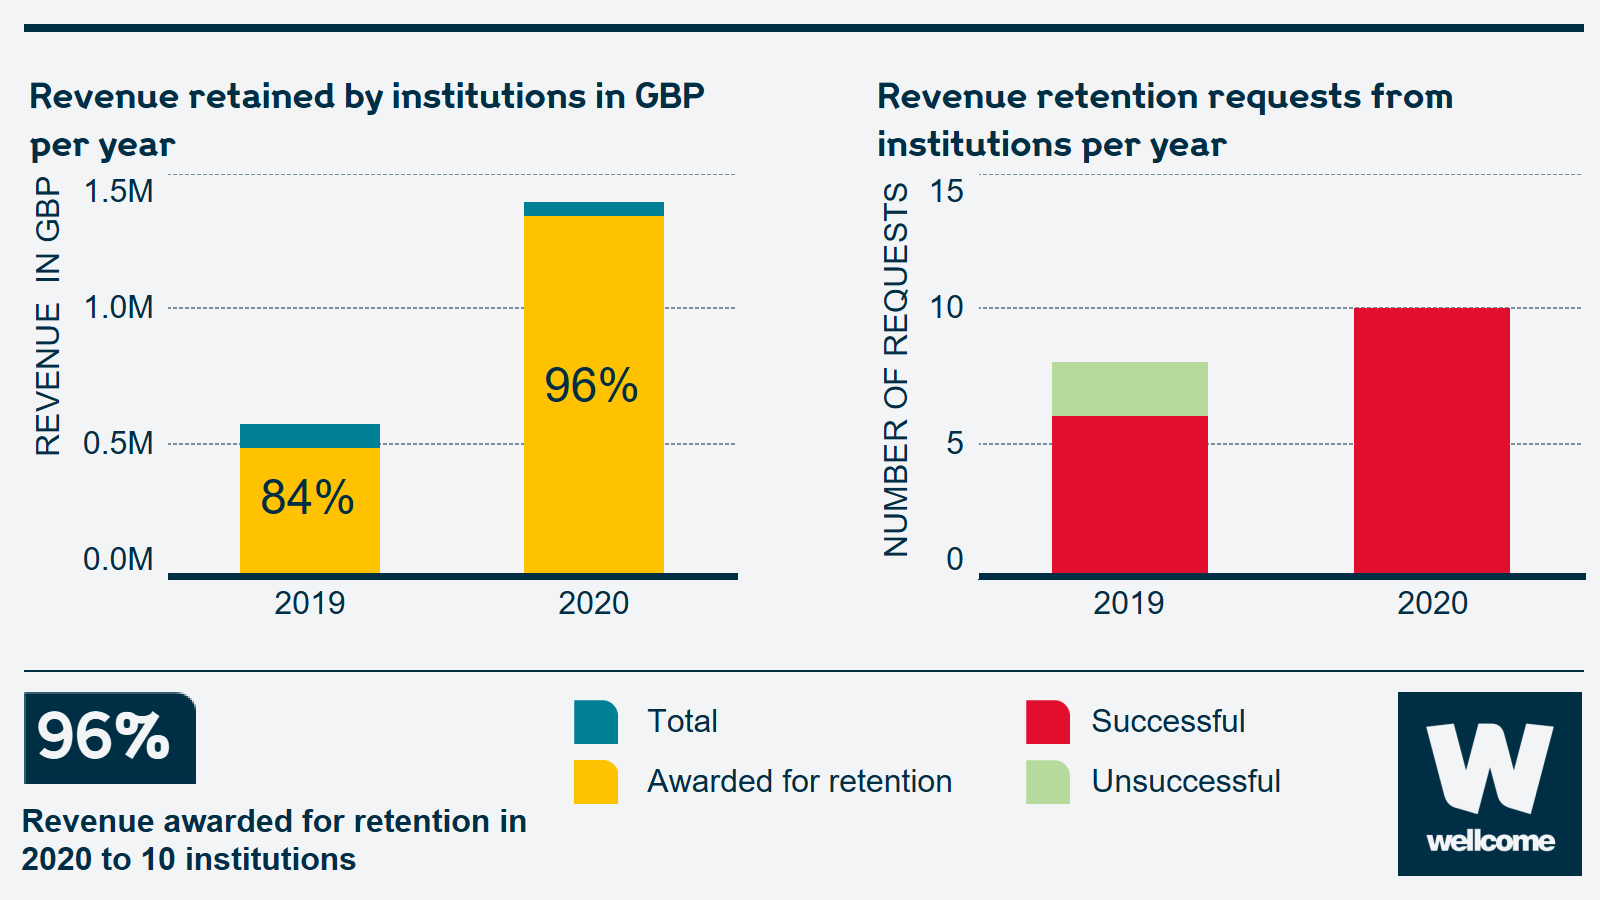 Two charts showing the revenue retained by institutions in GBP per year, and revenue retention requests from institutions per year. The revenue retained by institutions per year increased from around £500,000 in 2019 to more than £1 million in 2020. There was also a small increase in revenue retention requests from institutions per year in 2020 compared to 2021, and almost double the number of successful requests.